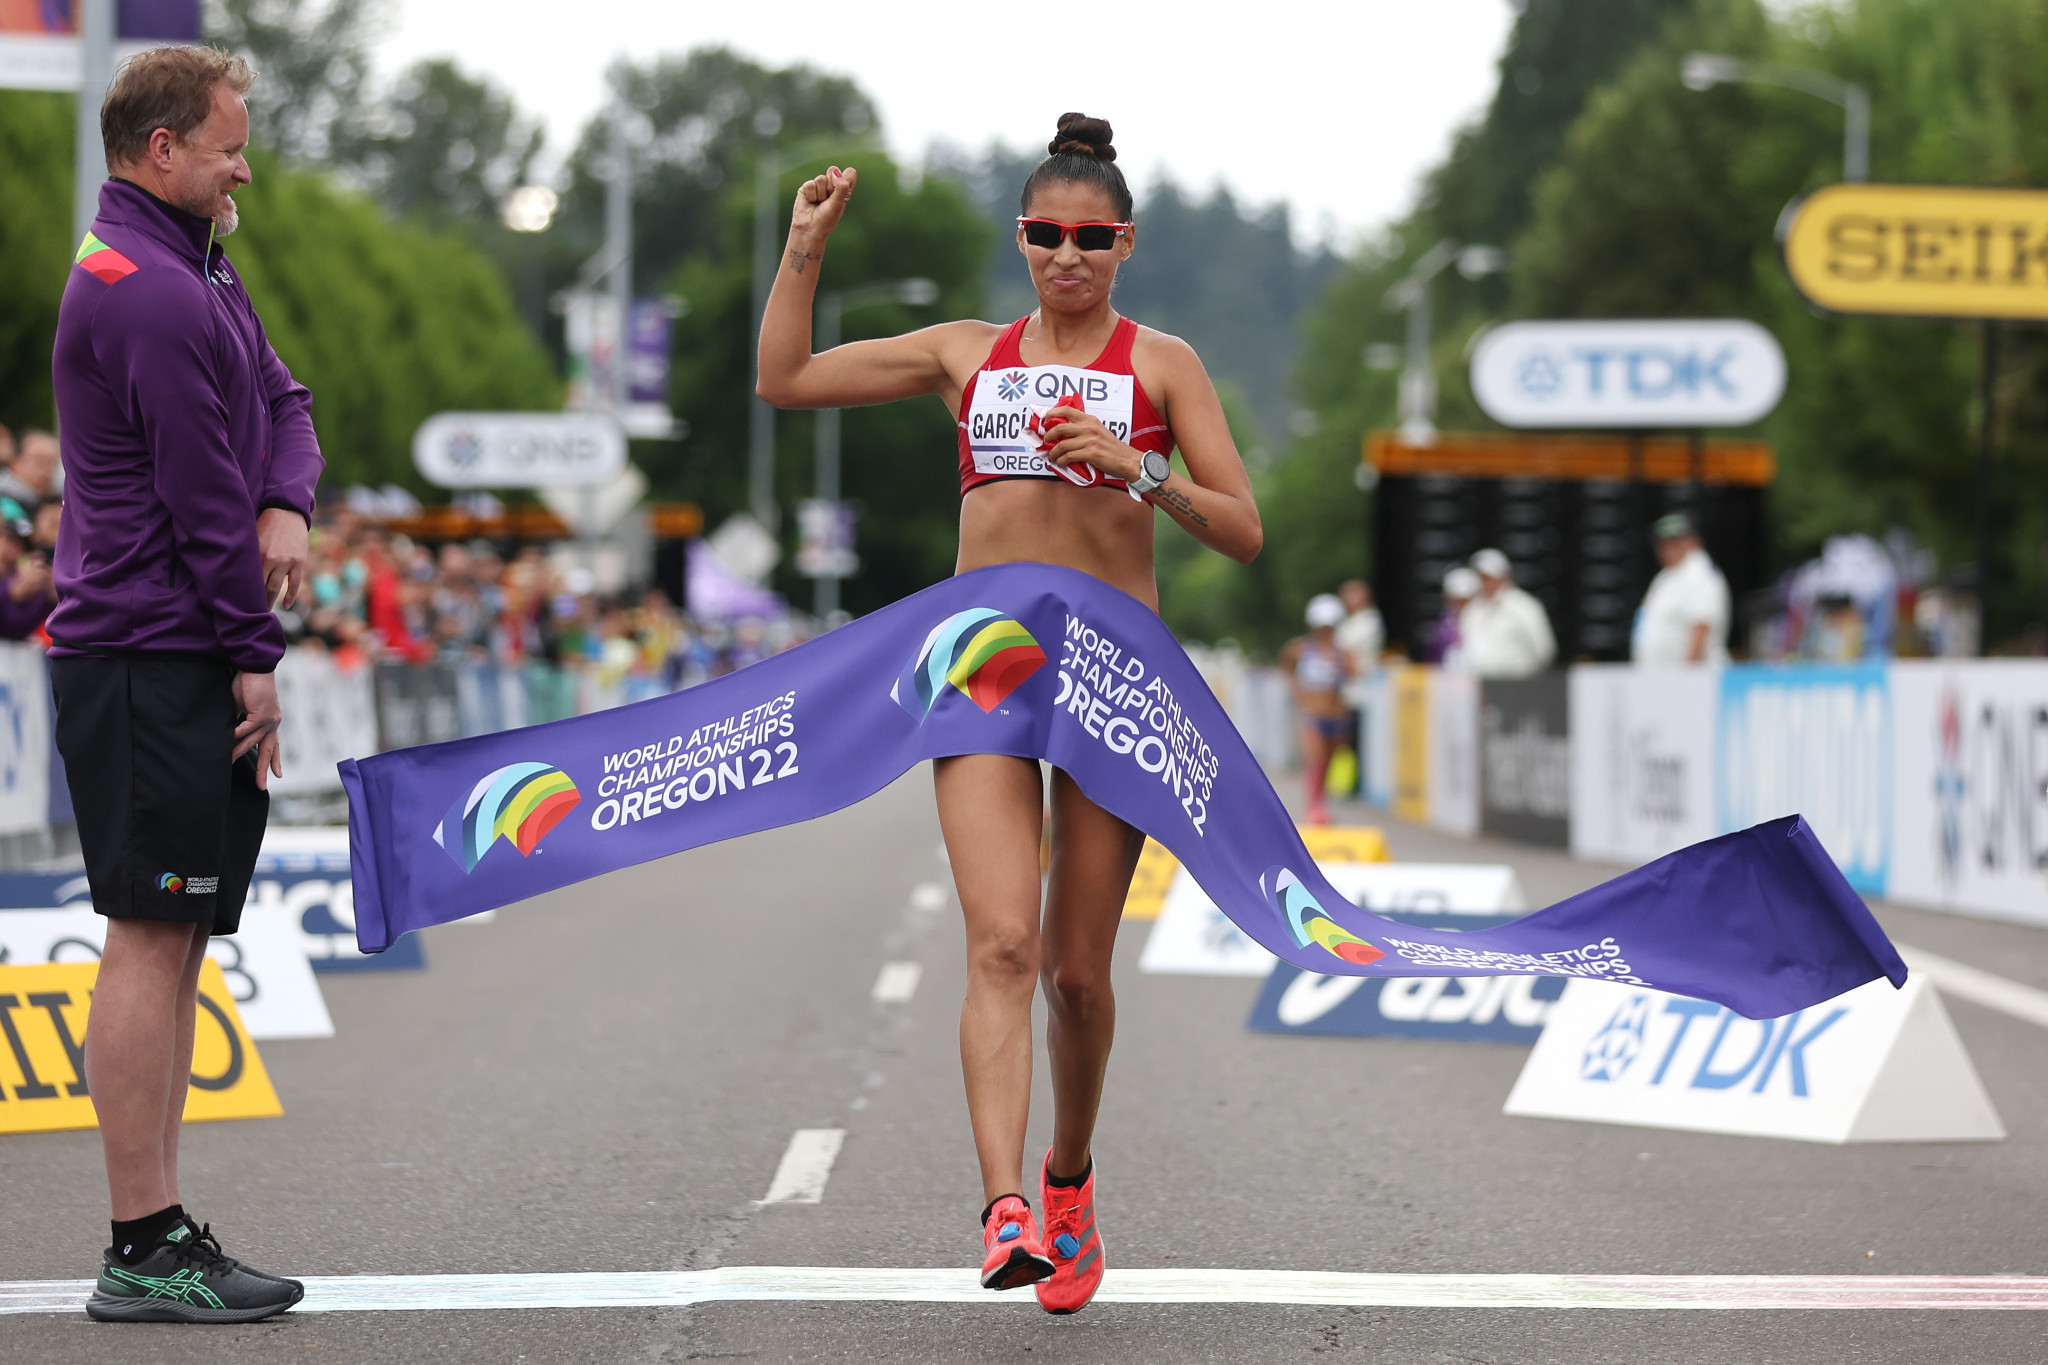 Kimberly García claimed both world titles in women's racewalking at the World Athletics Championships in Oregon ©Getty Images